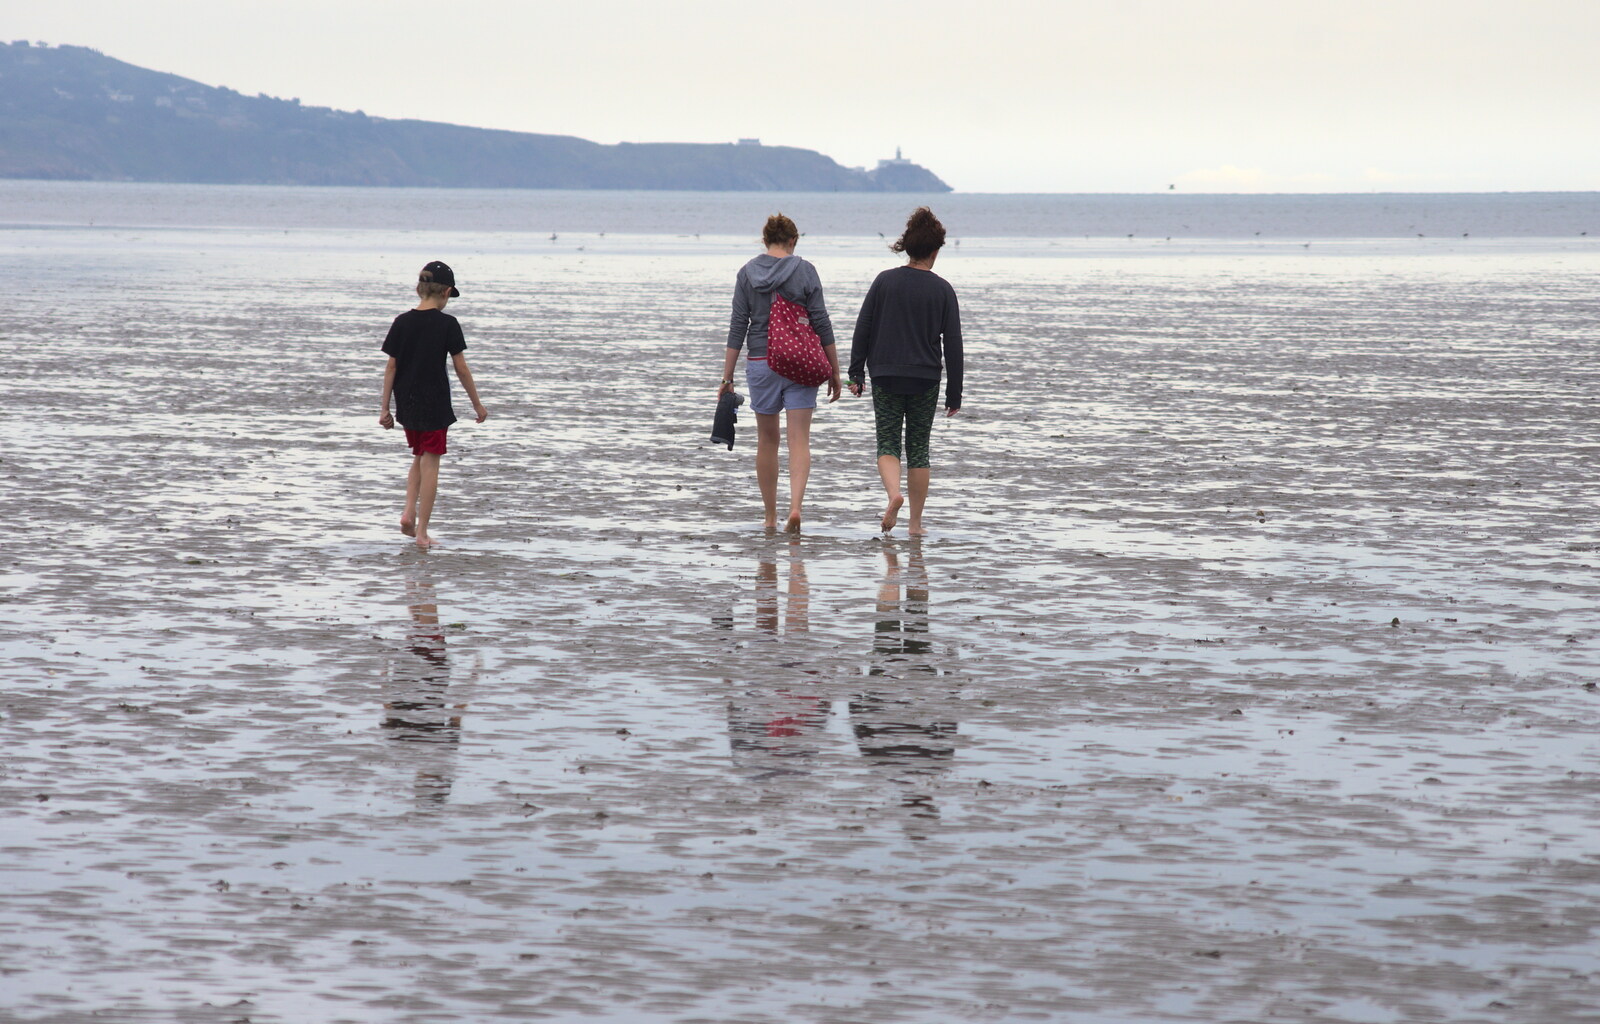 Fred, Isobel and Evelyn walk further out to sea from A Trip to Da Gorls, Monkstown Farm, County Dublin, Ireland - 4th August 2018